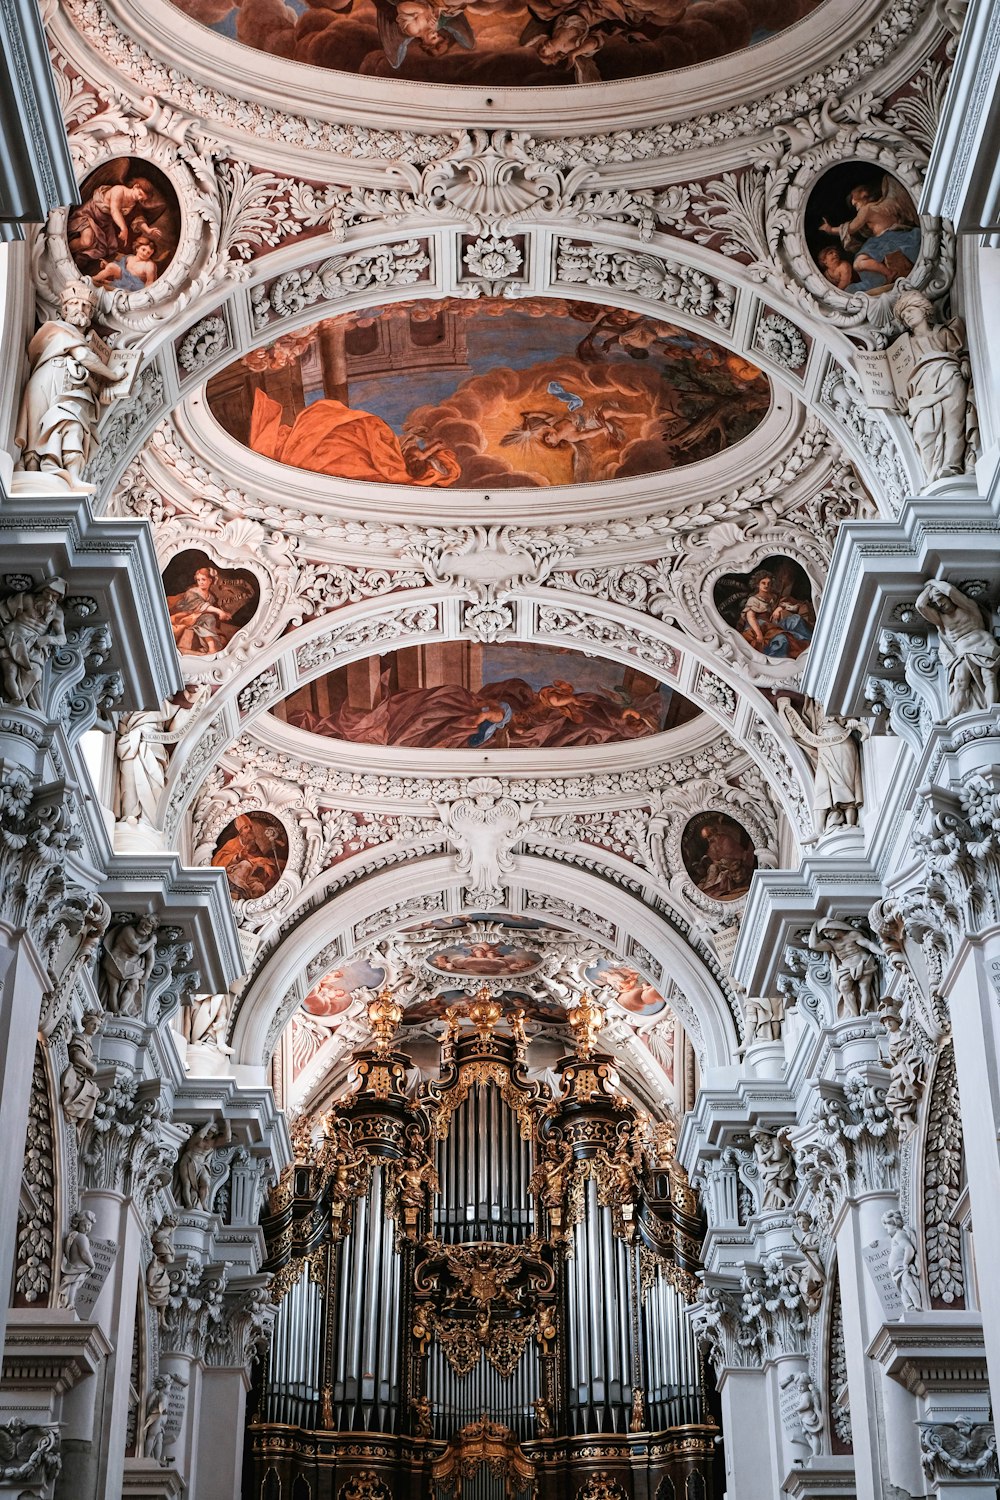 a large ornate ceiling with paintings